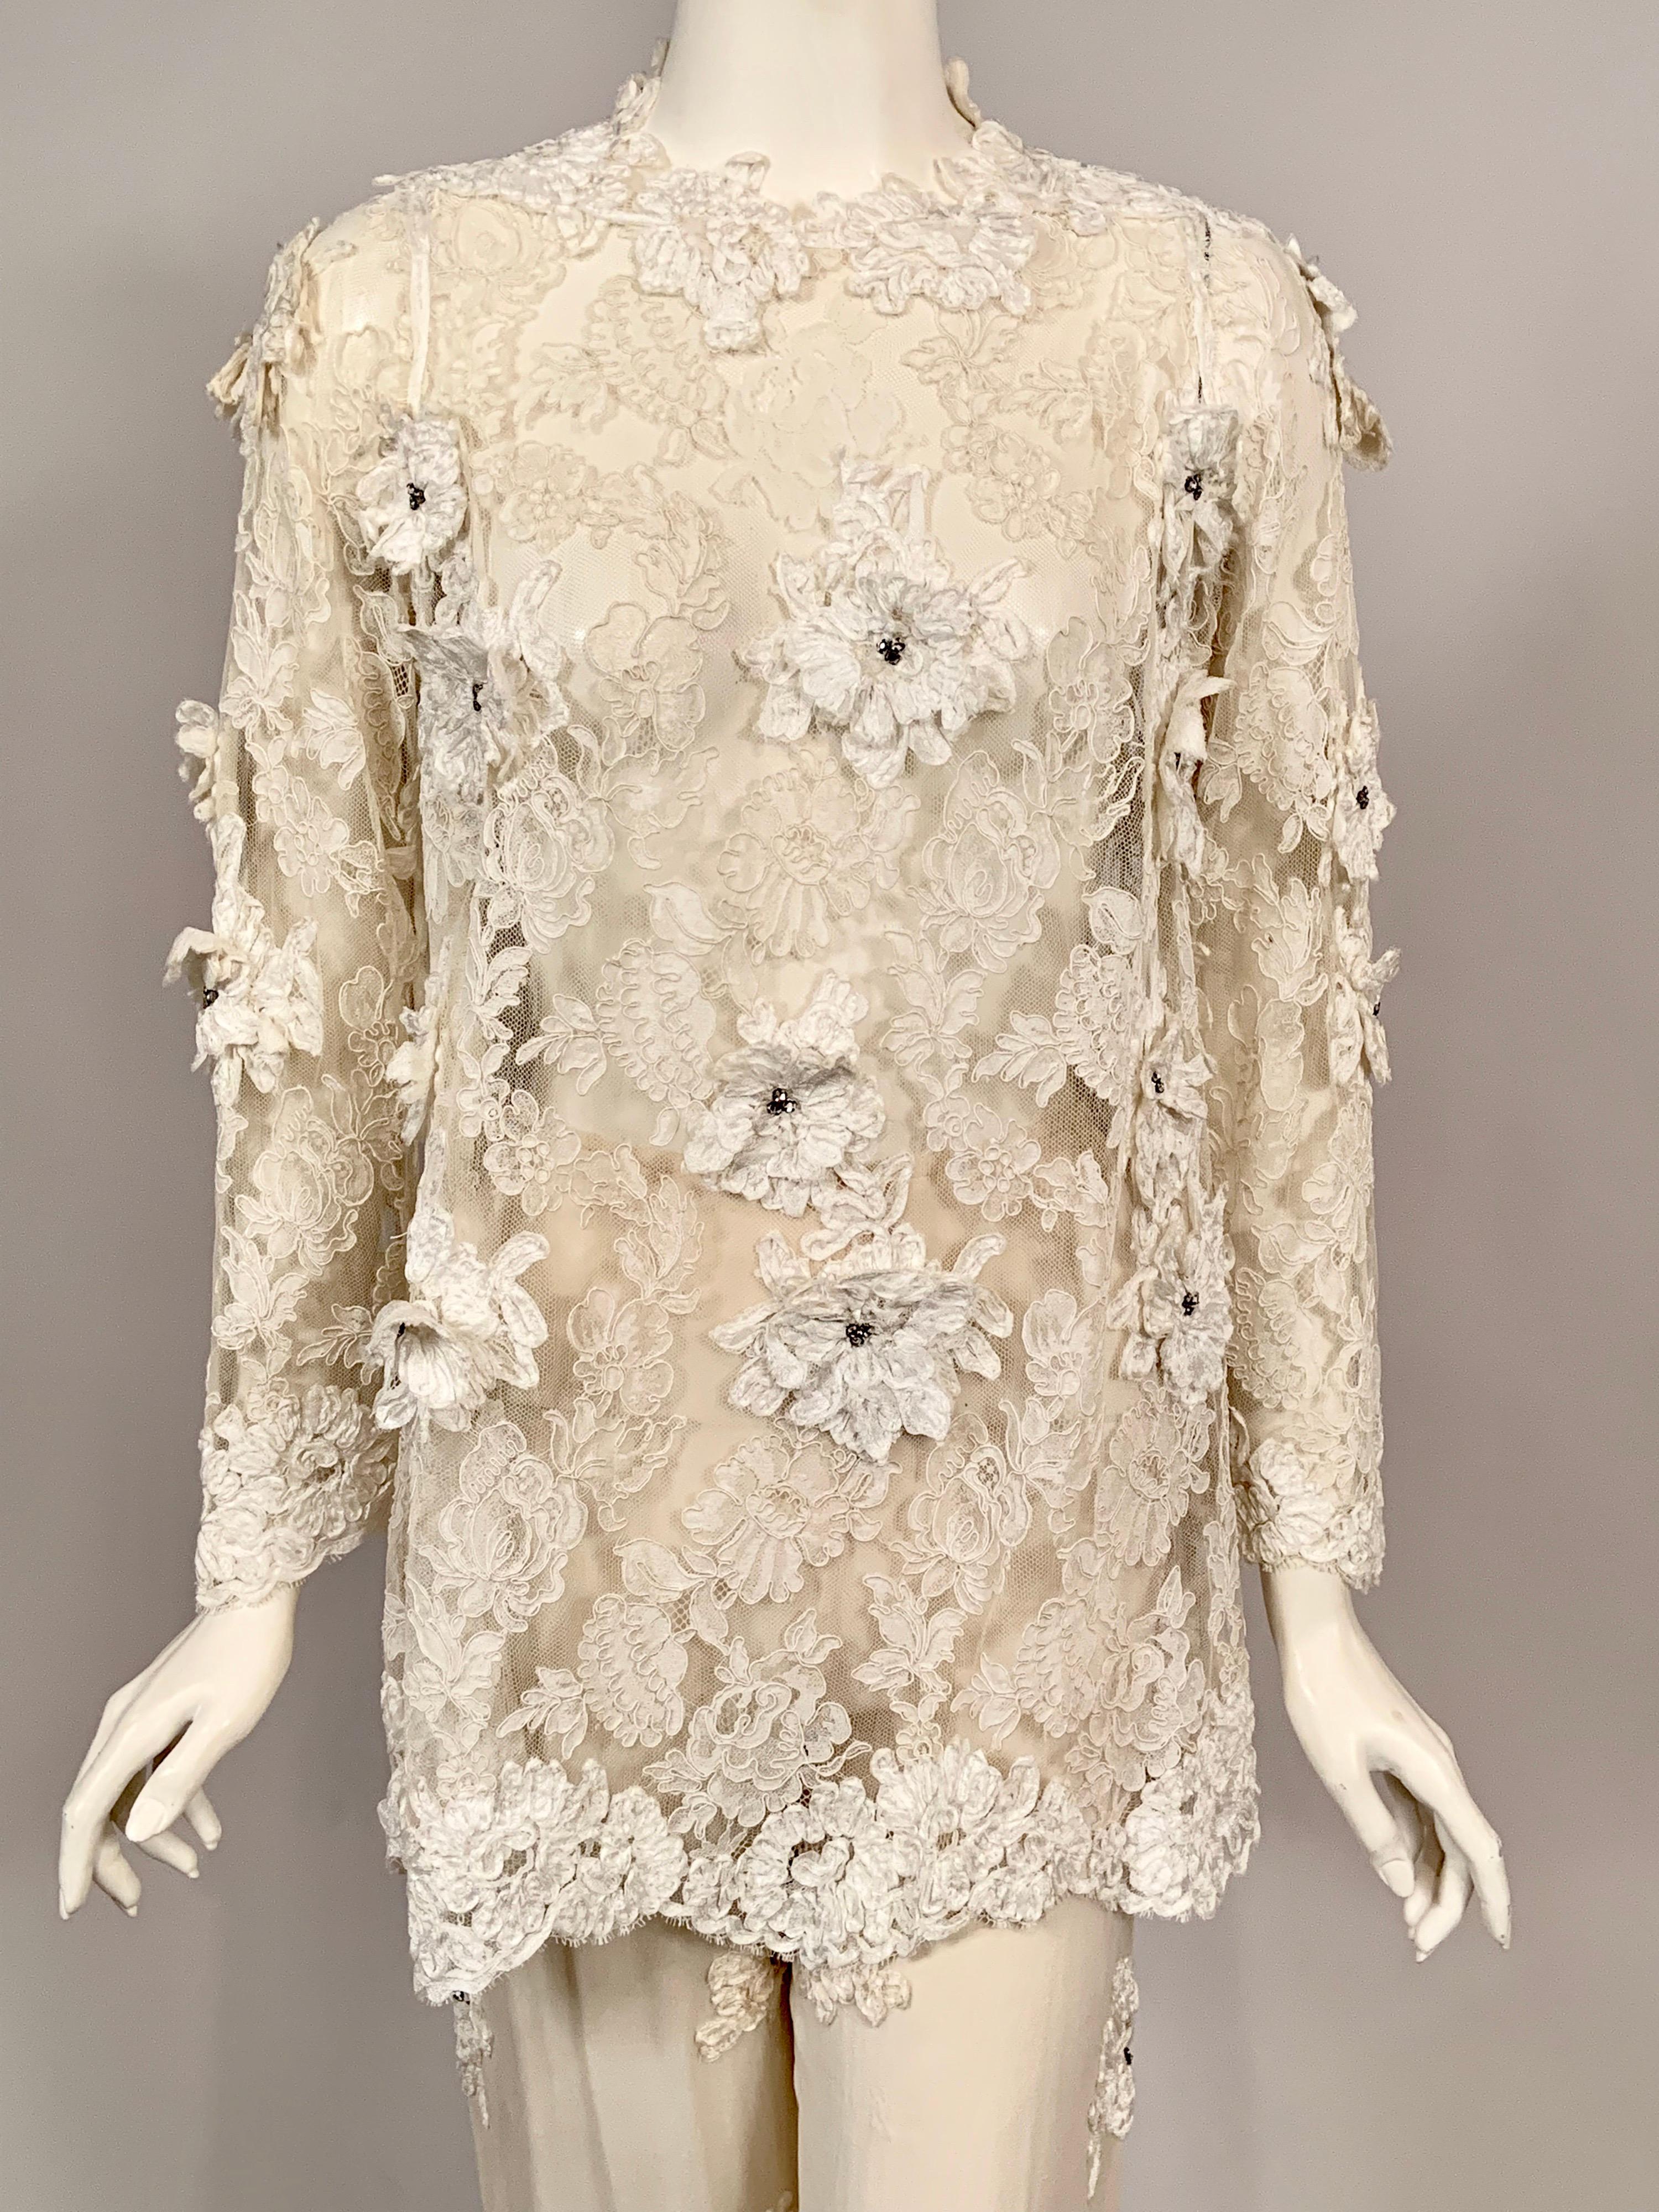 A sheer ivory lace top is appliqued with white silk ribbon flowers and prong set rhinestone centers. It is collarless with long sleeves and closes at the center back with snaps following the design of the lace. The flowing ivory chiffon pants have a